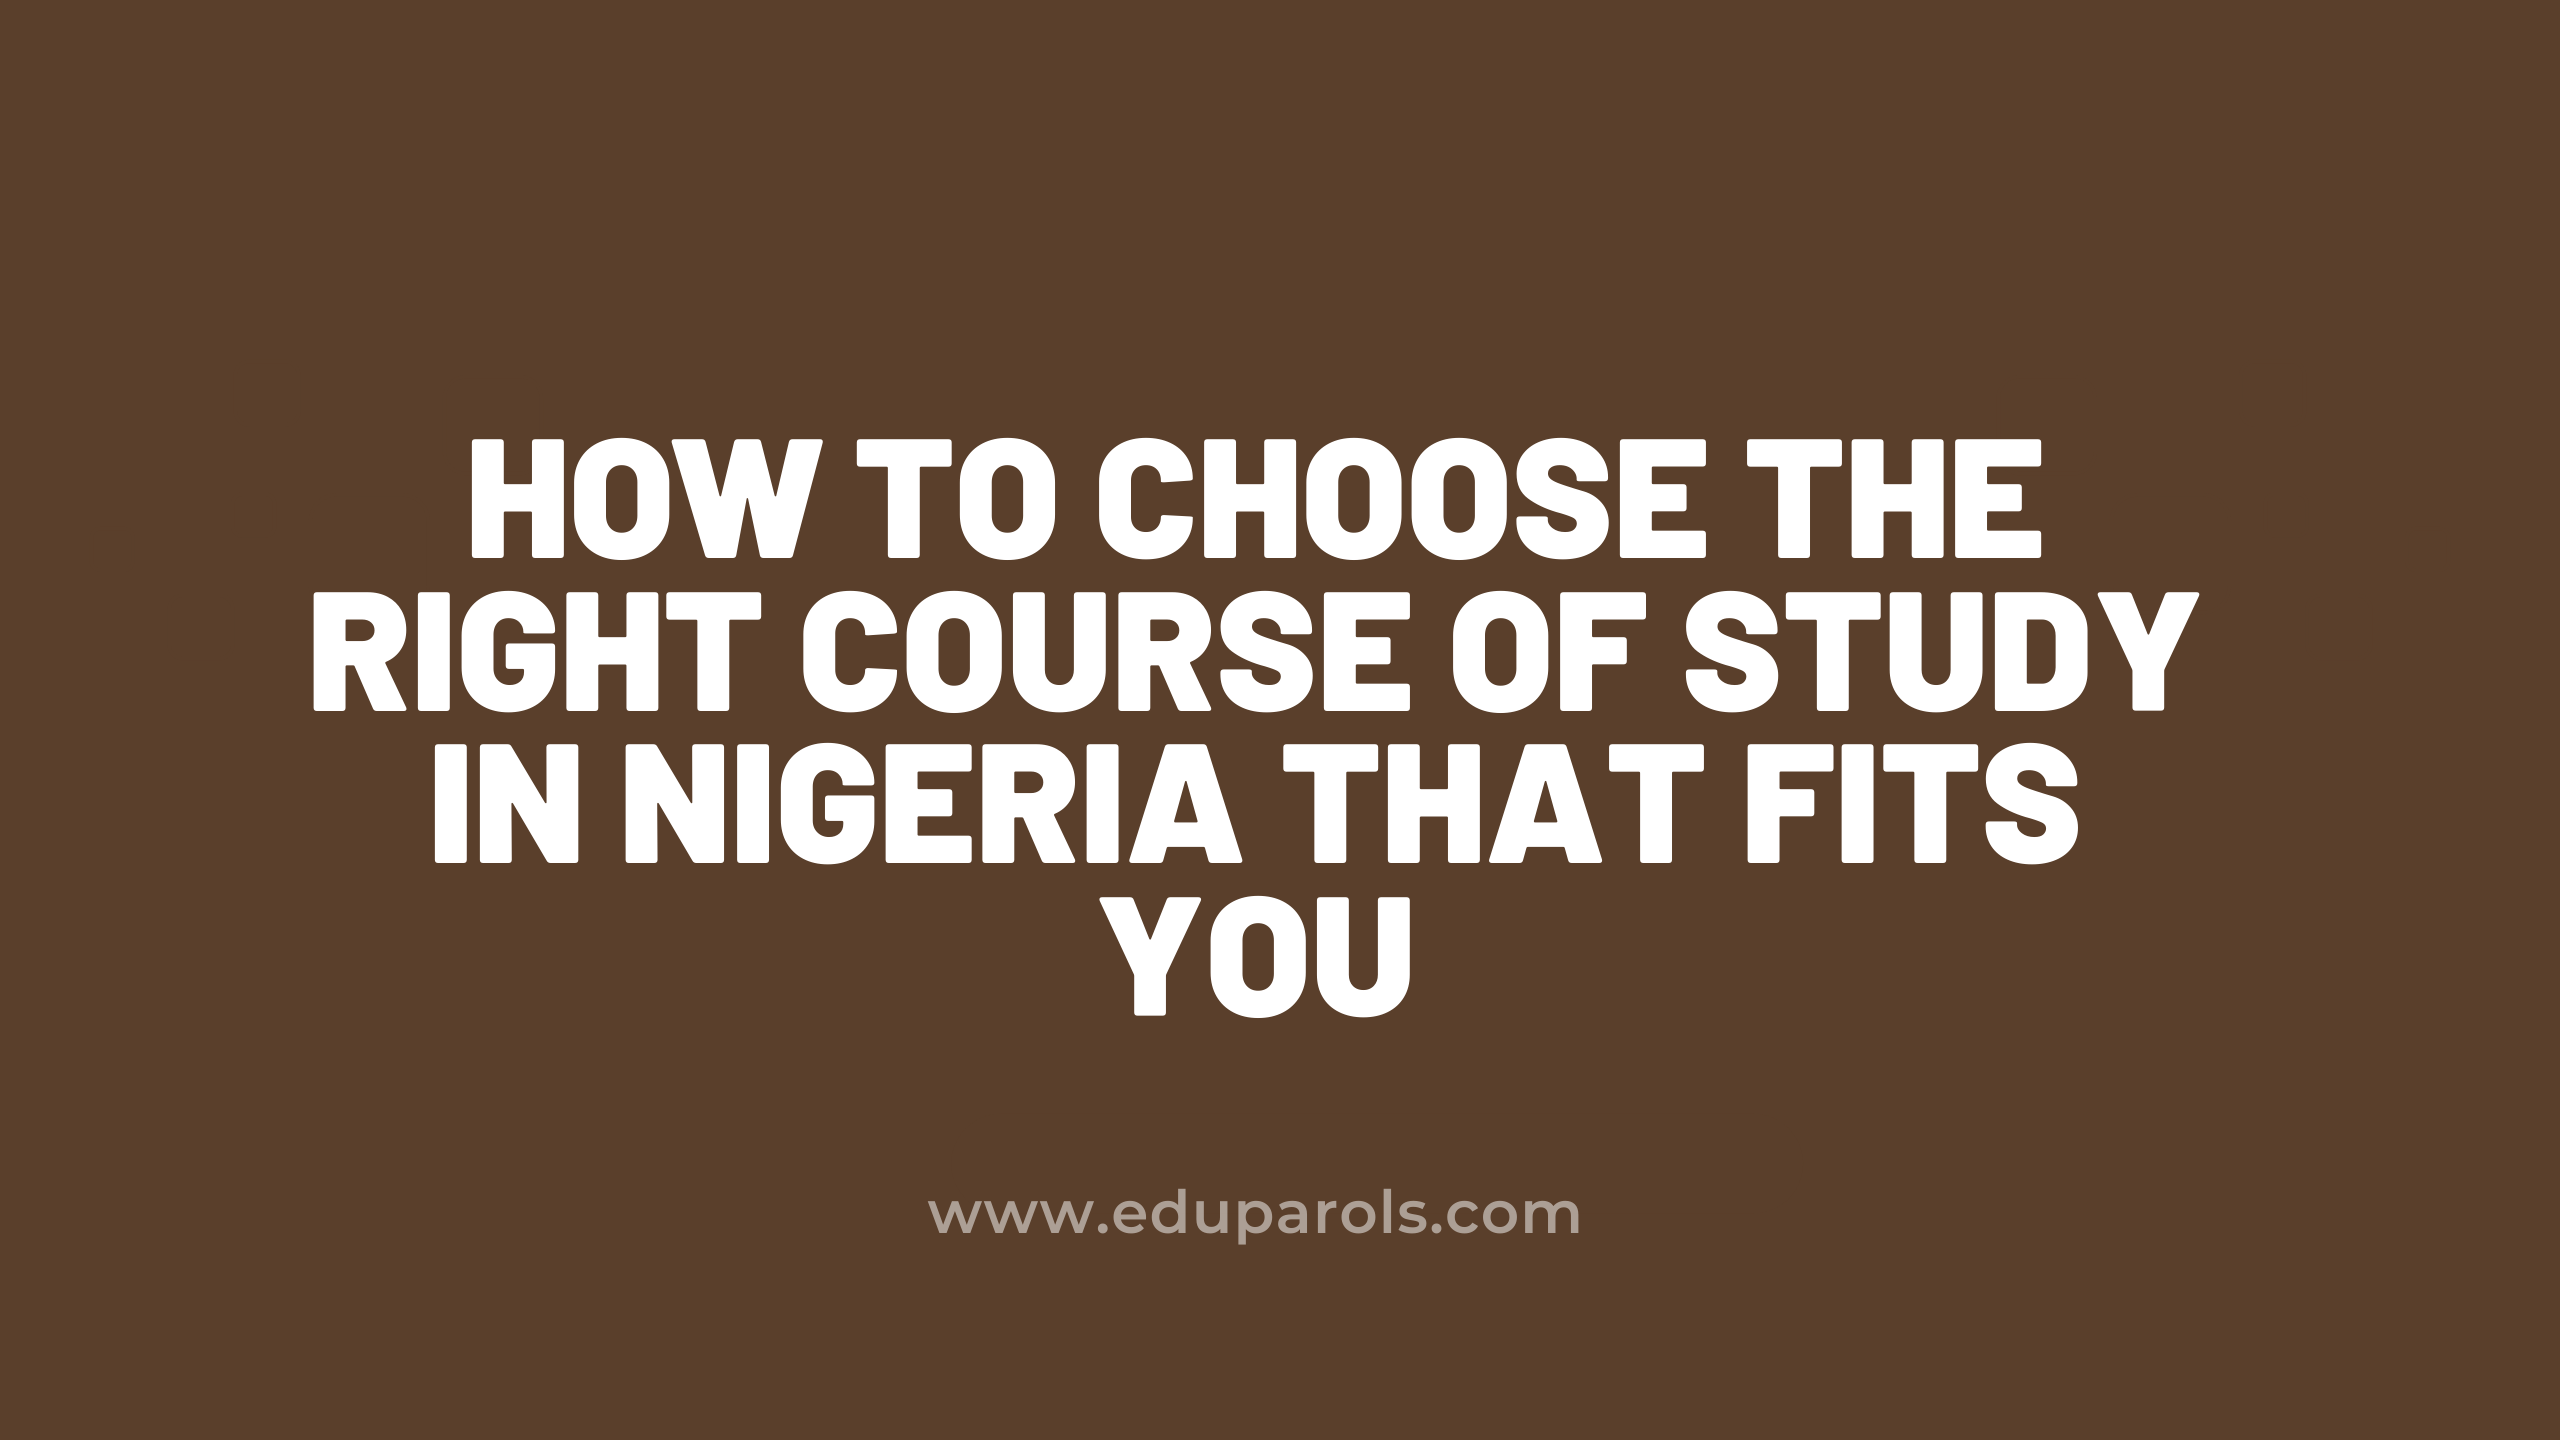 How to Choose the Right Course of Study